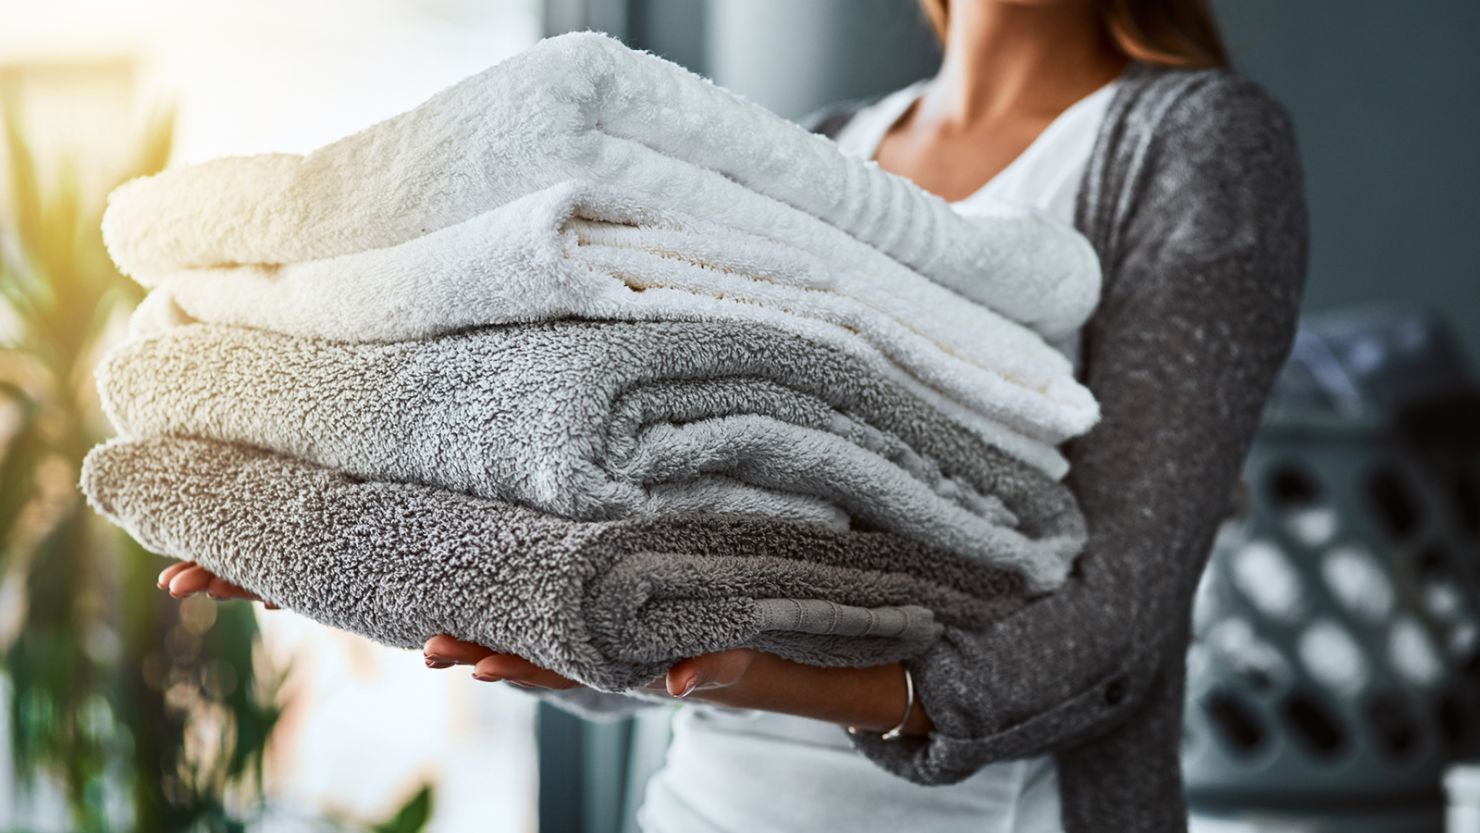 How to wash towels with care to keep them looking new